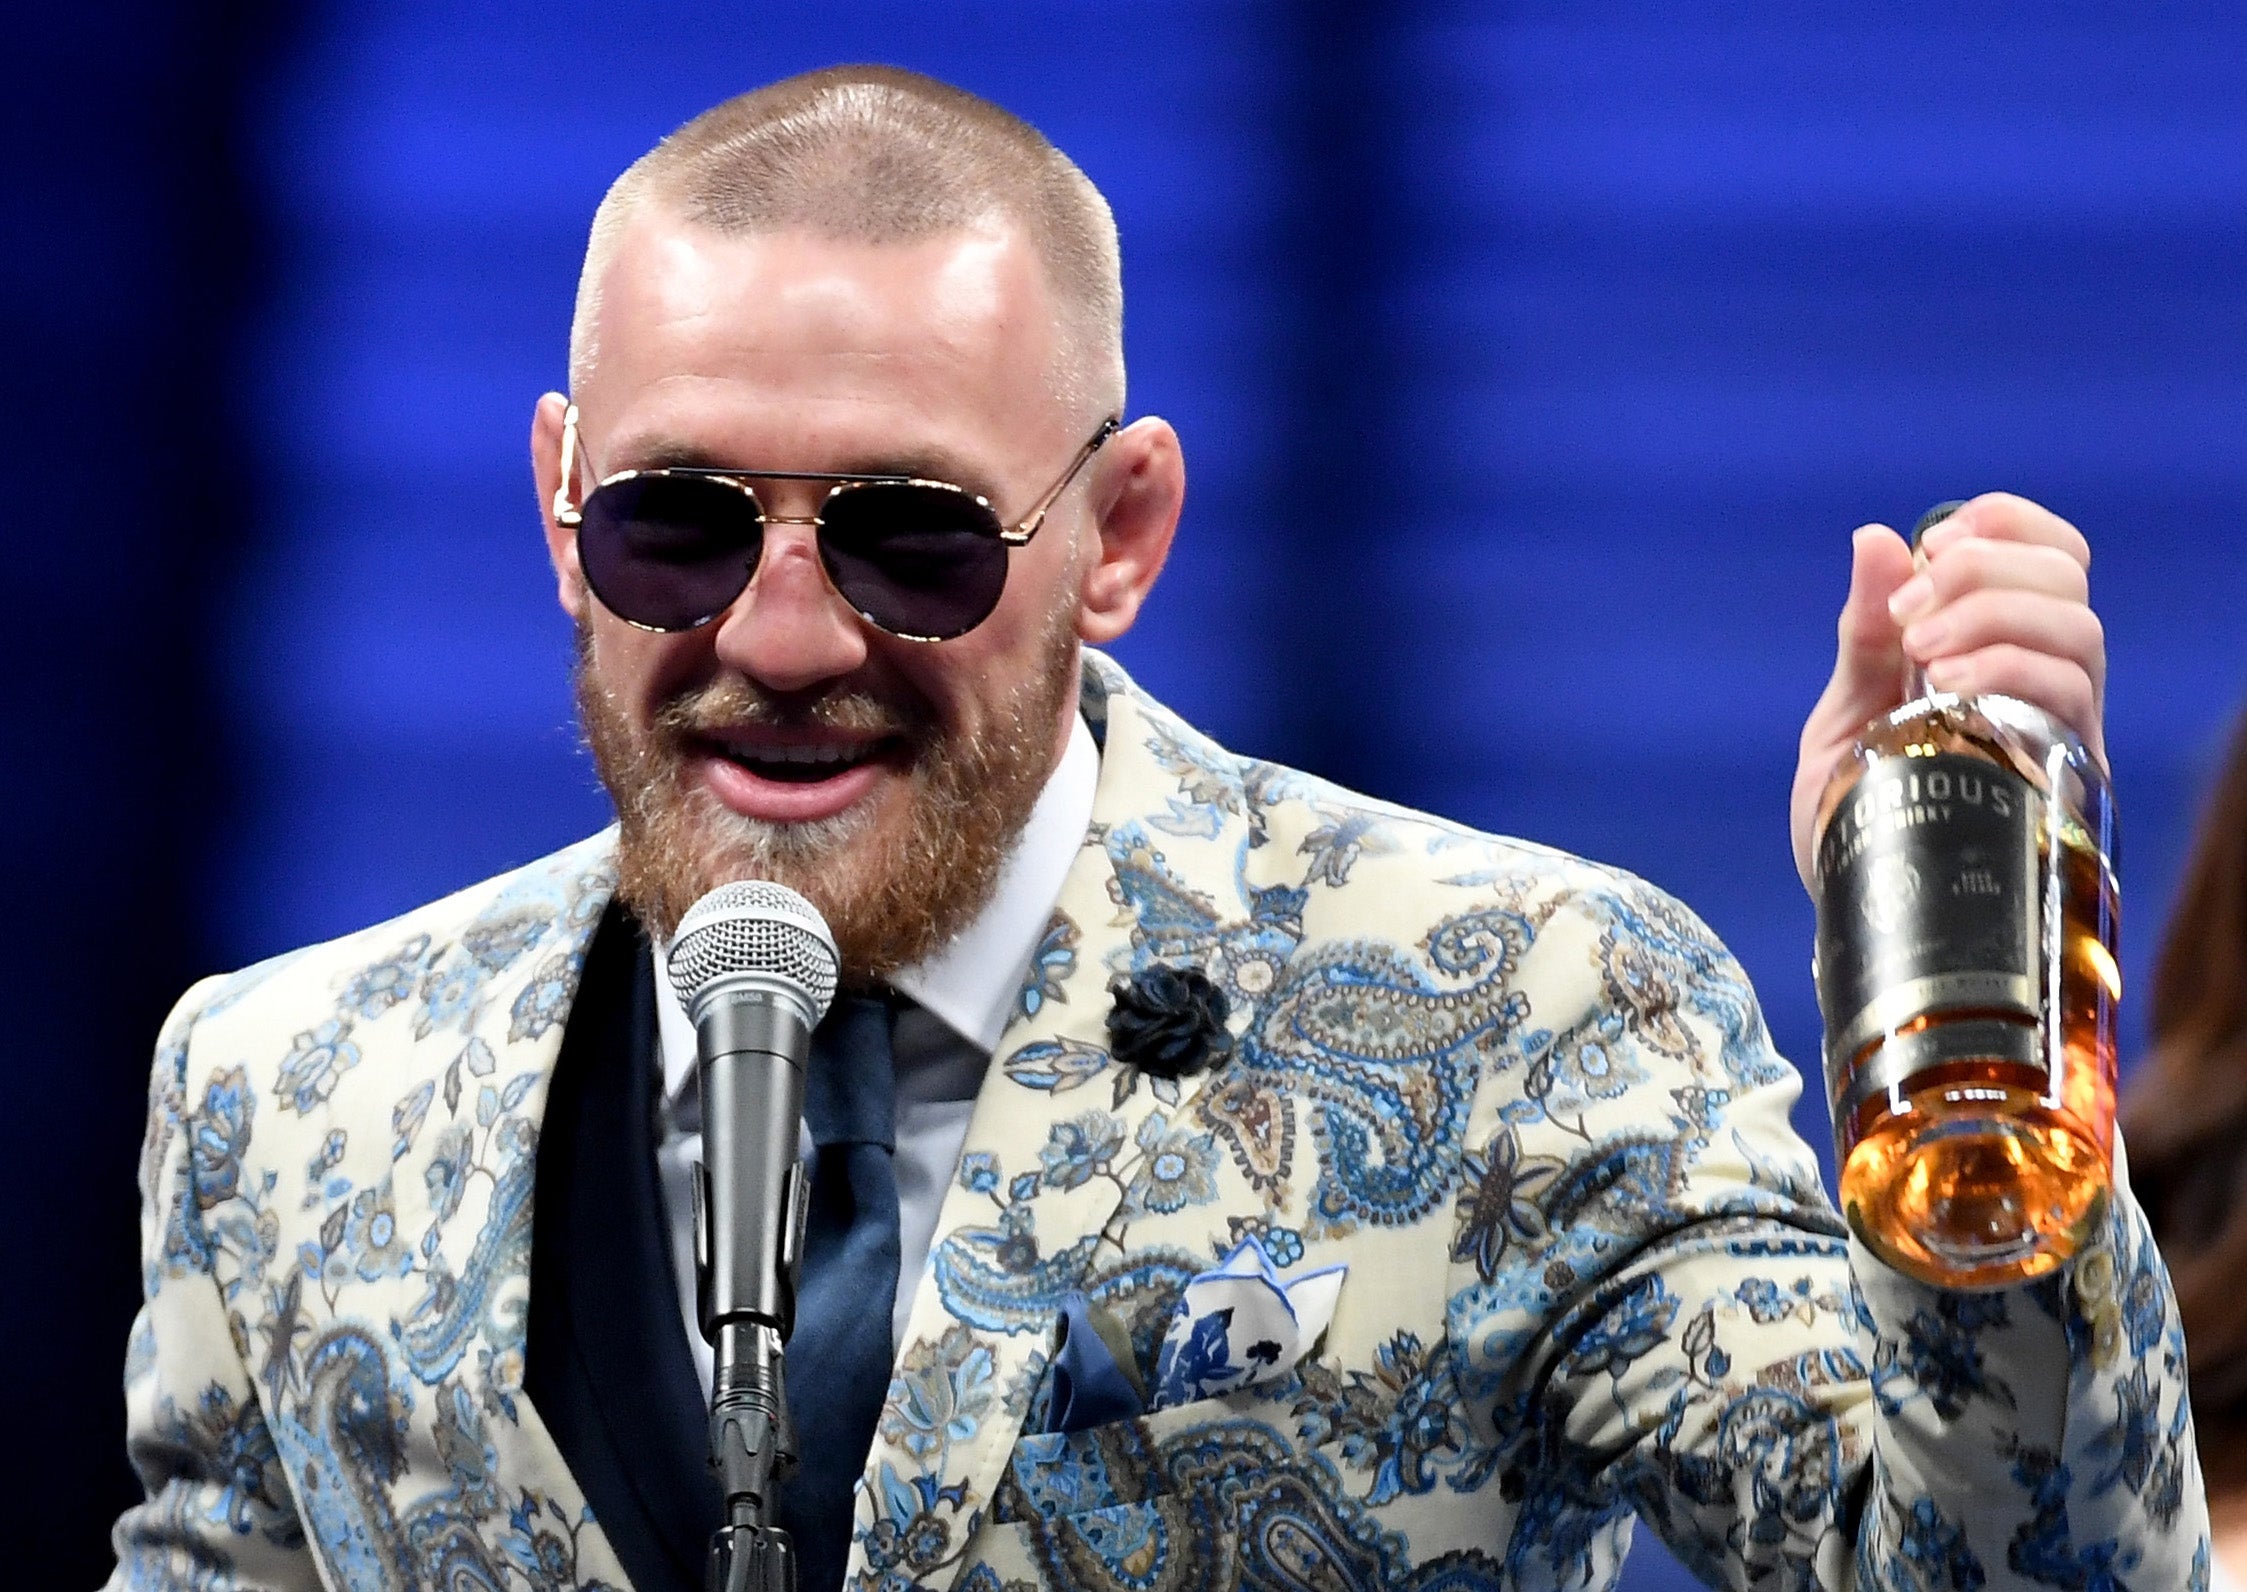 McGregor has become an entertainer first, sportsman second